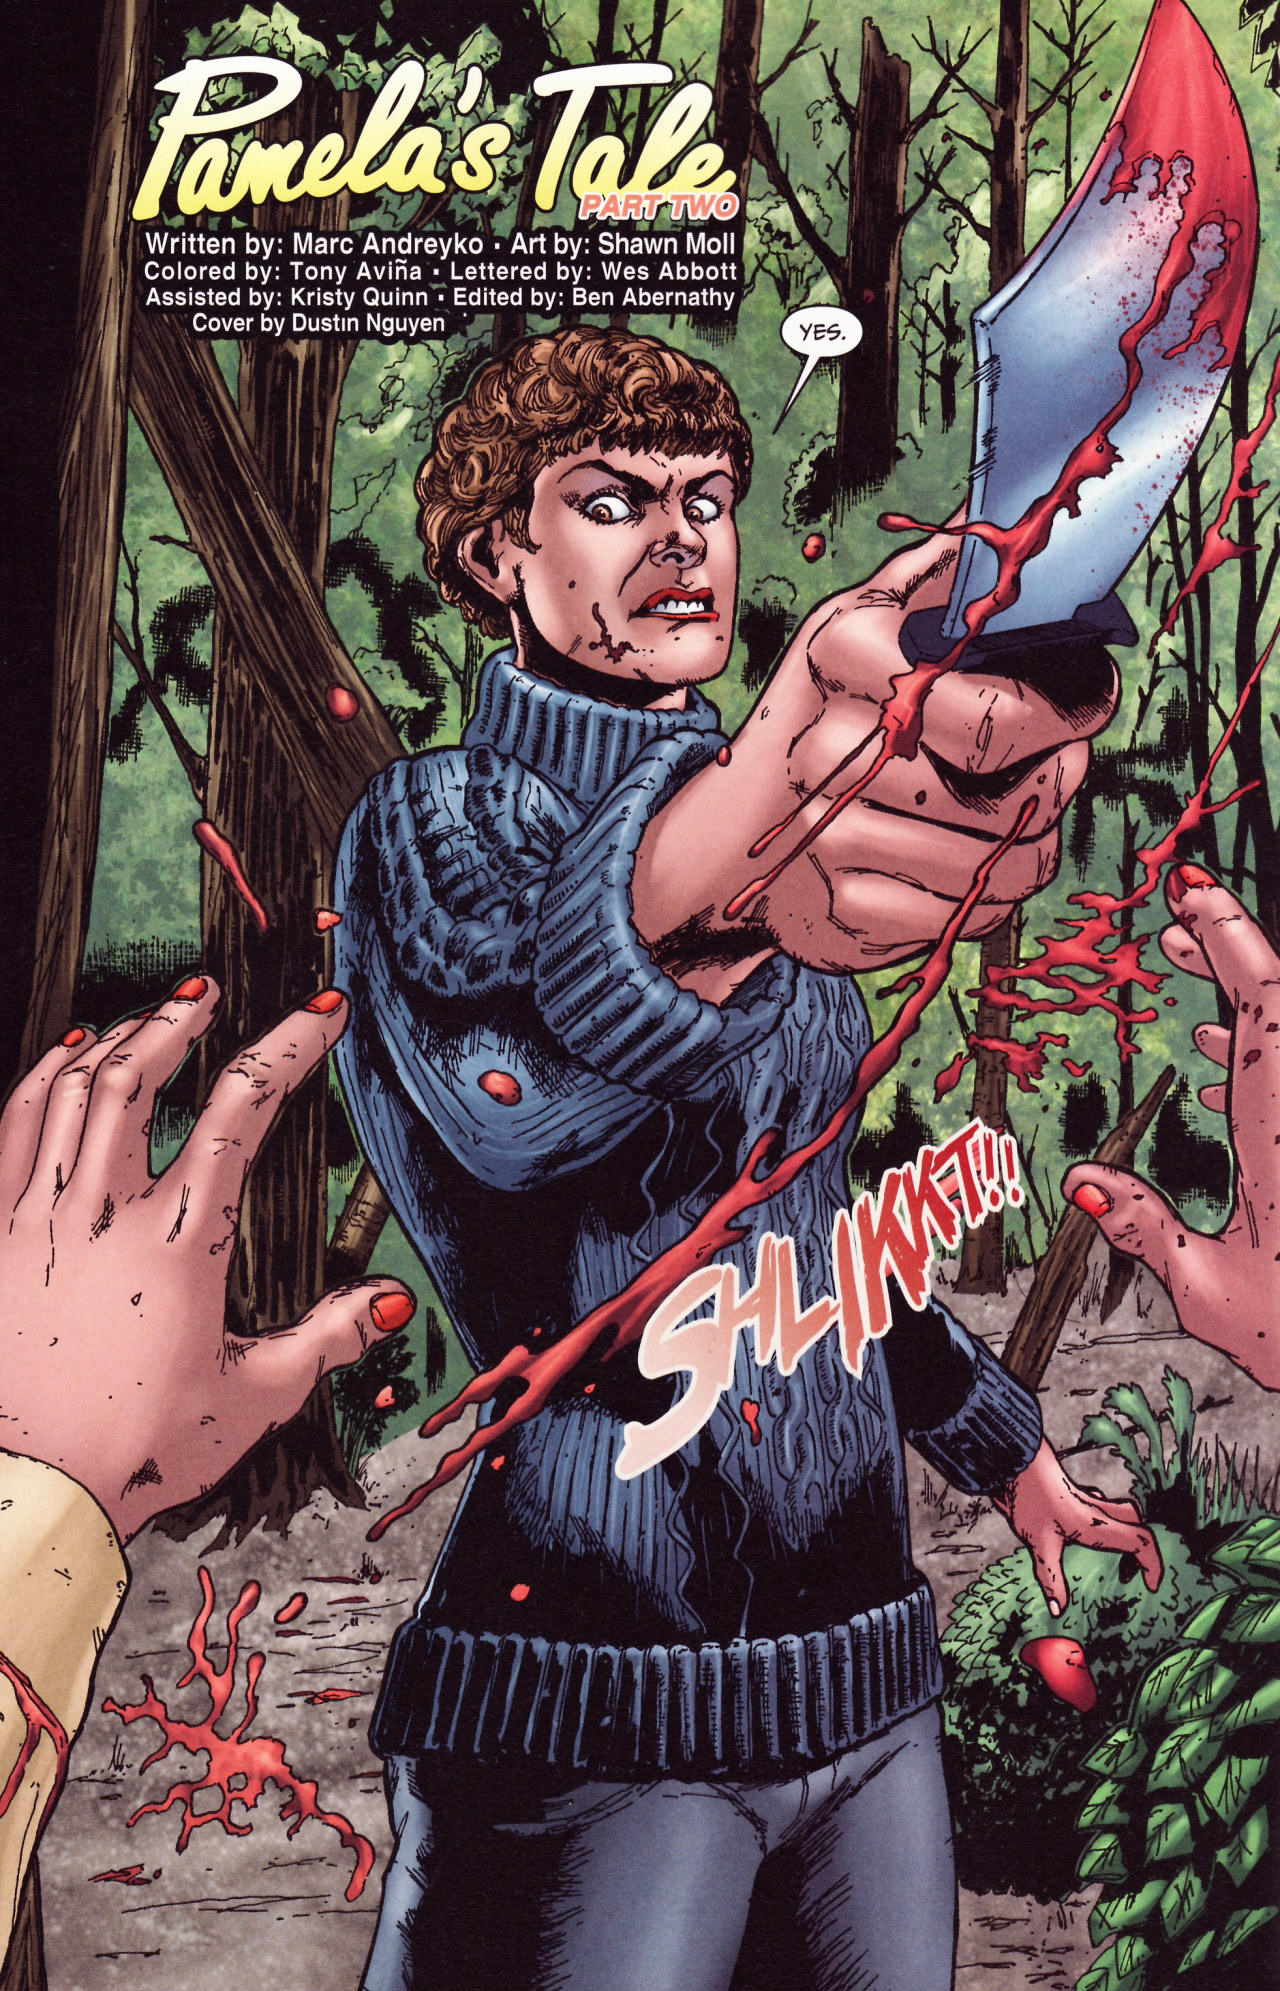 Read online Friday the 13th: Pamela's Tale comic -  Issue #2 - 6